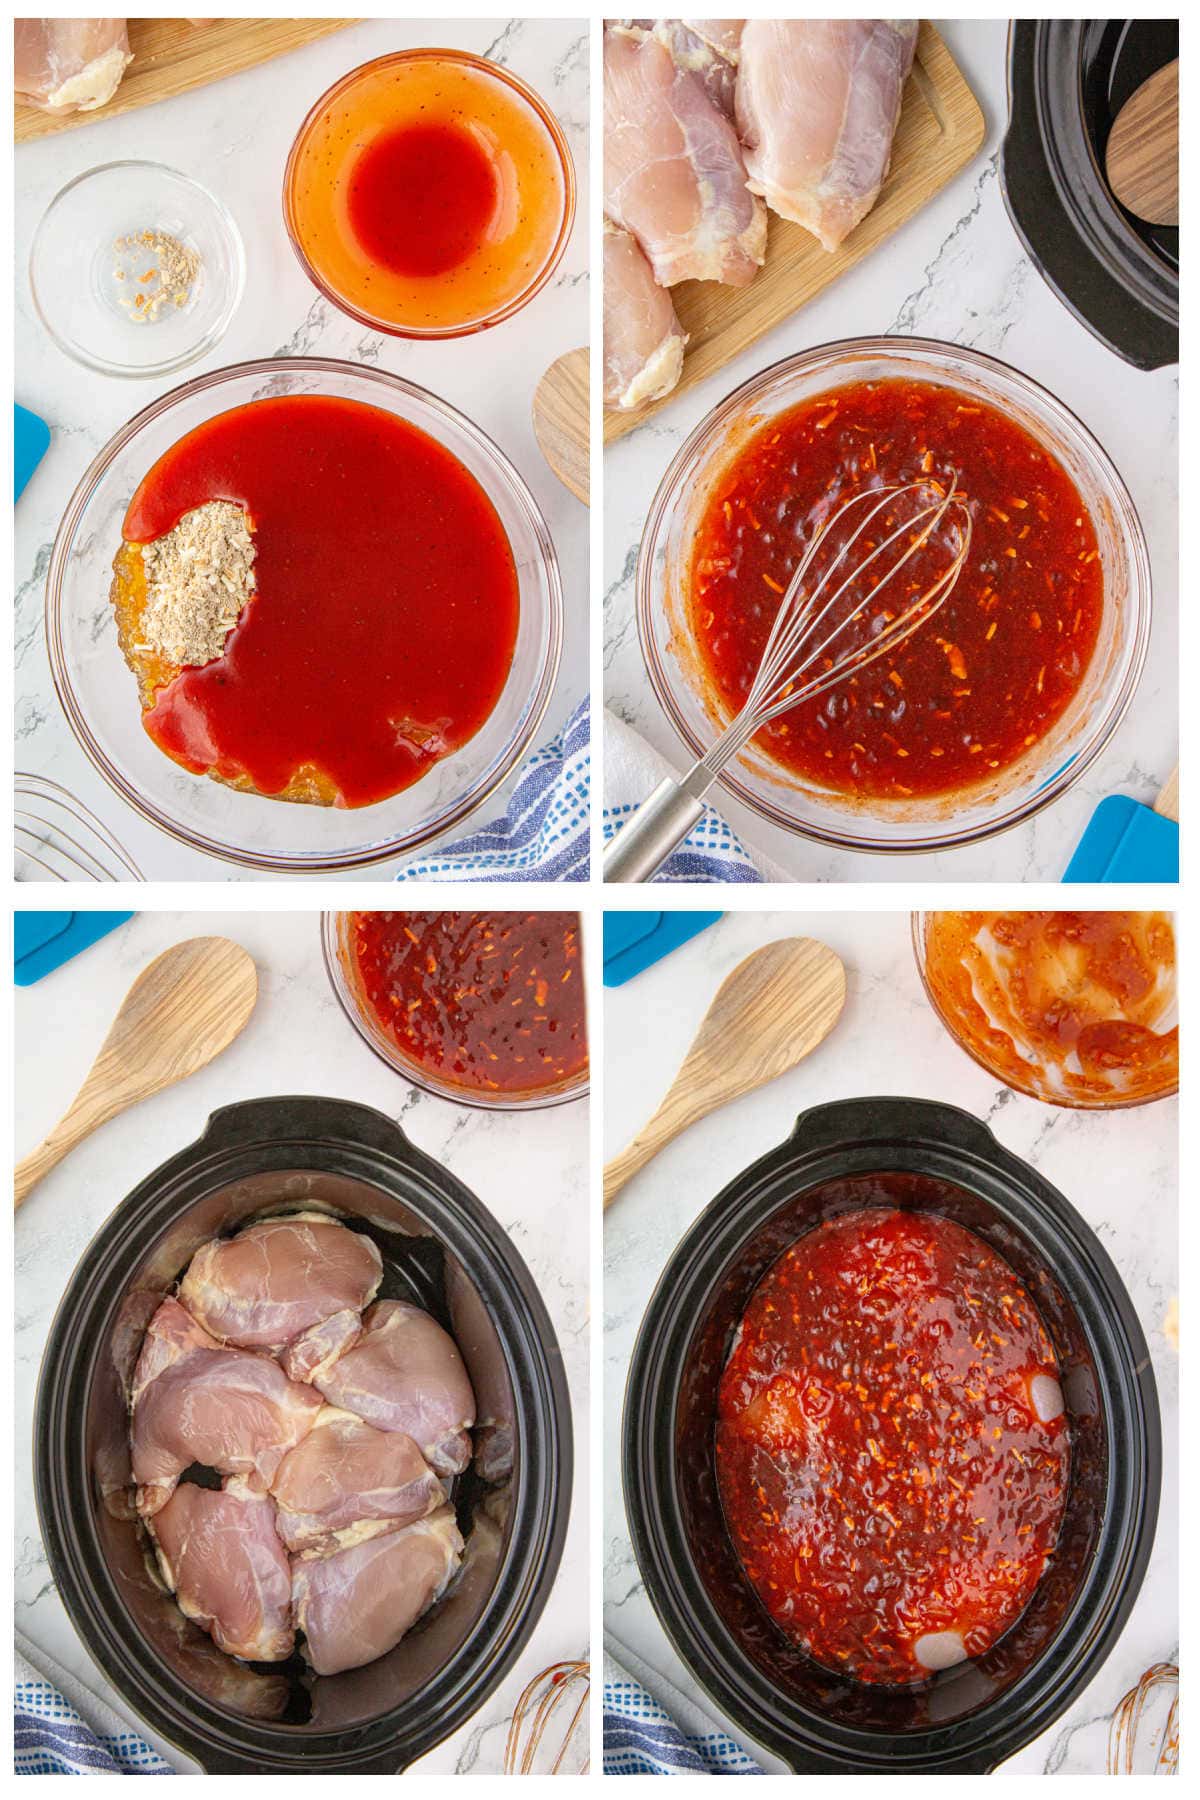 Step by step images showing how to make apricot chicken.